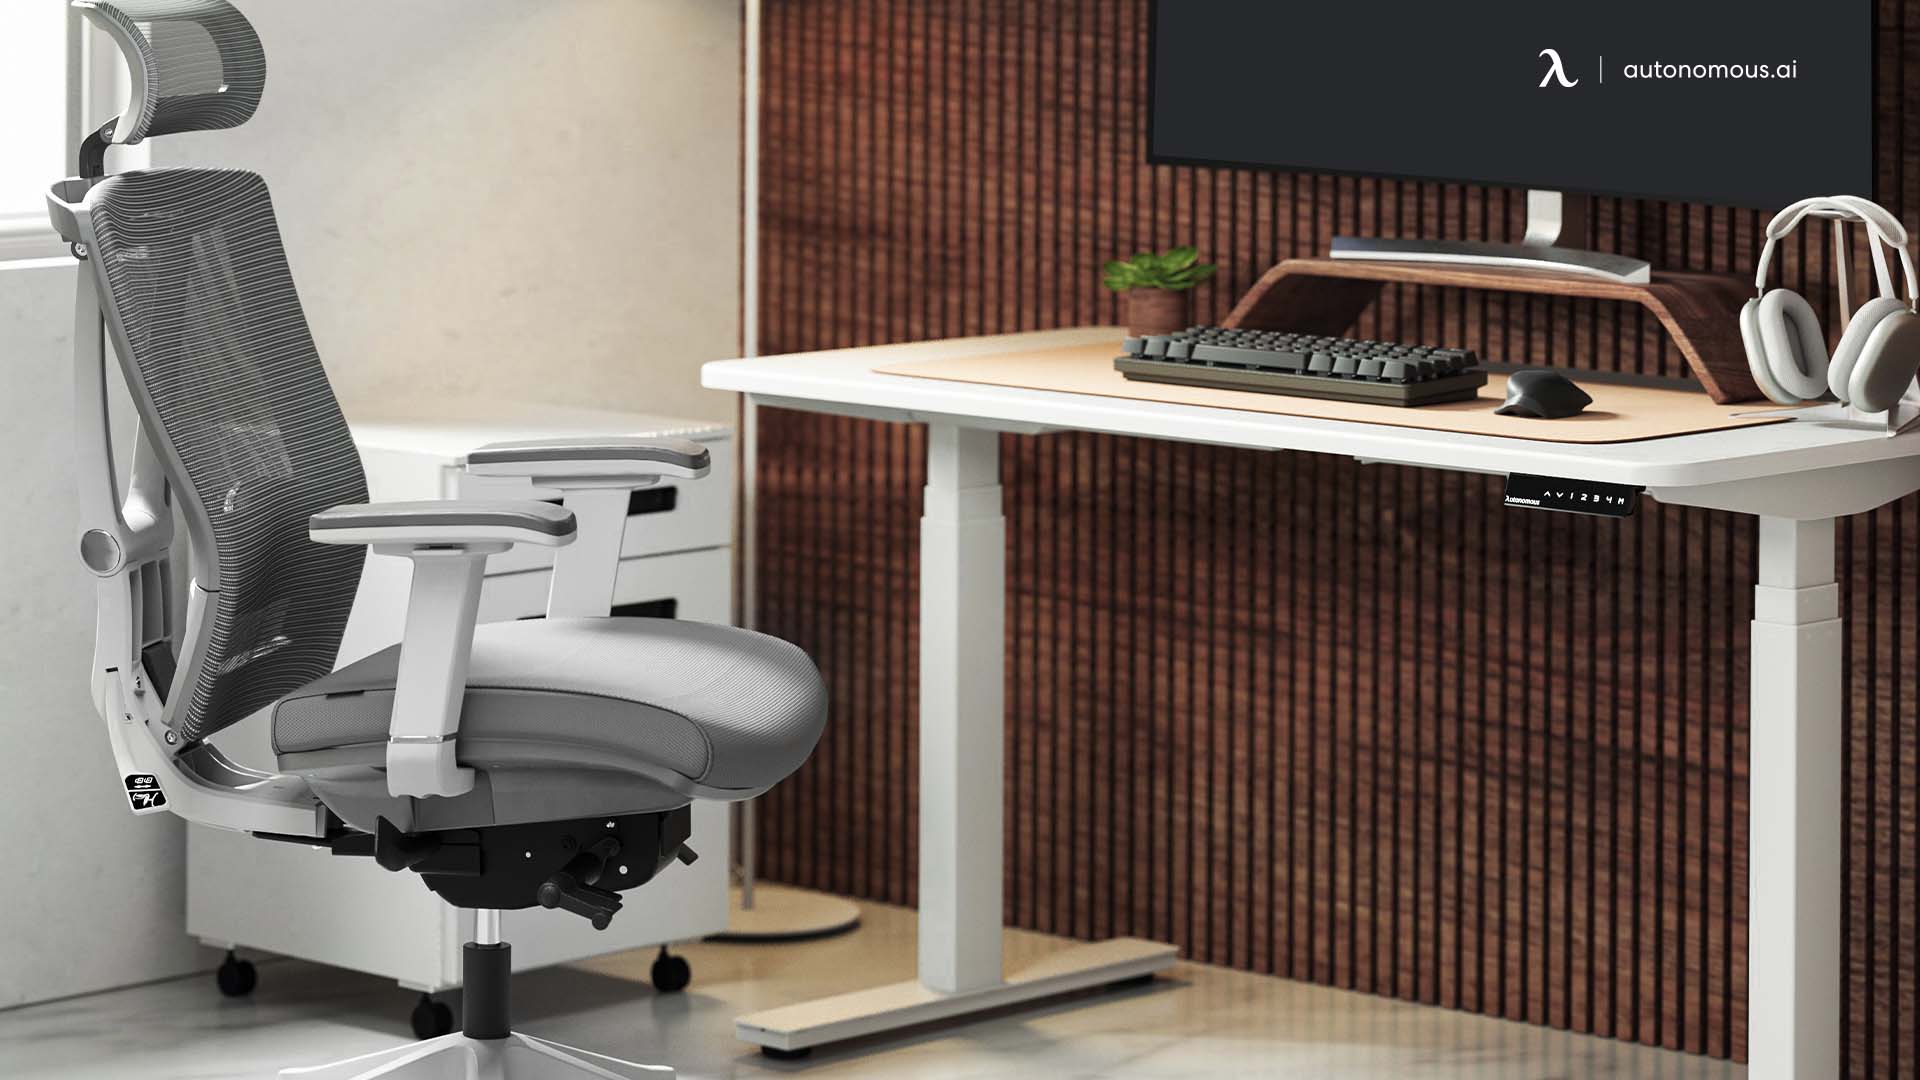 10 Must-Know Things Before Buying a Height Adjustable Standing Desk